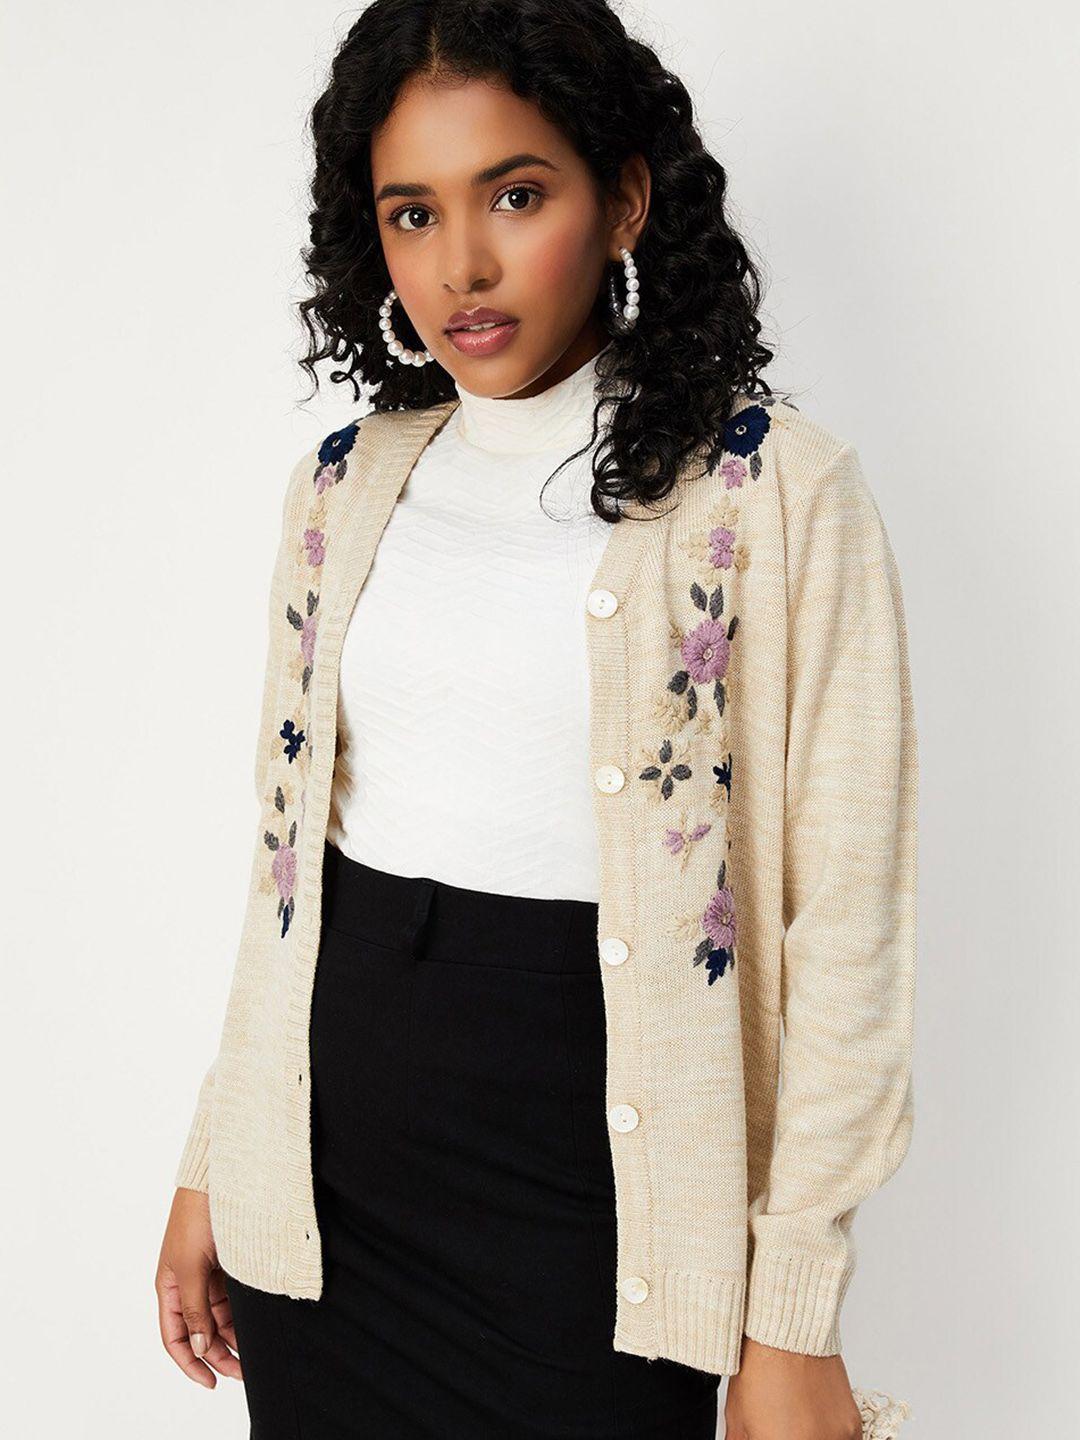 max embroidered v-neck cardigan sweater